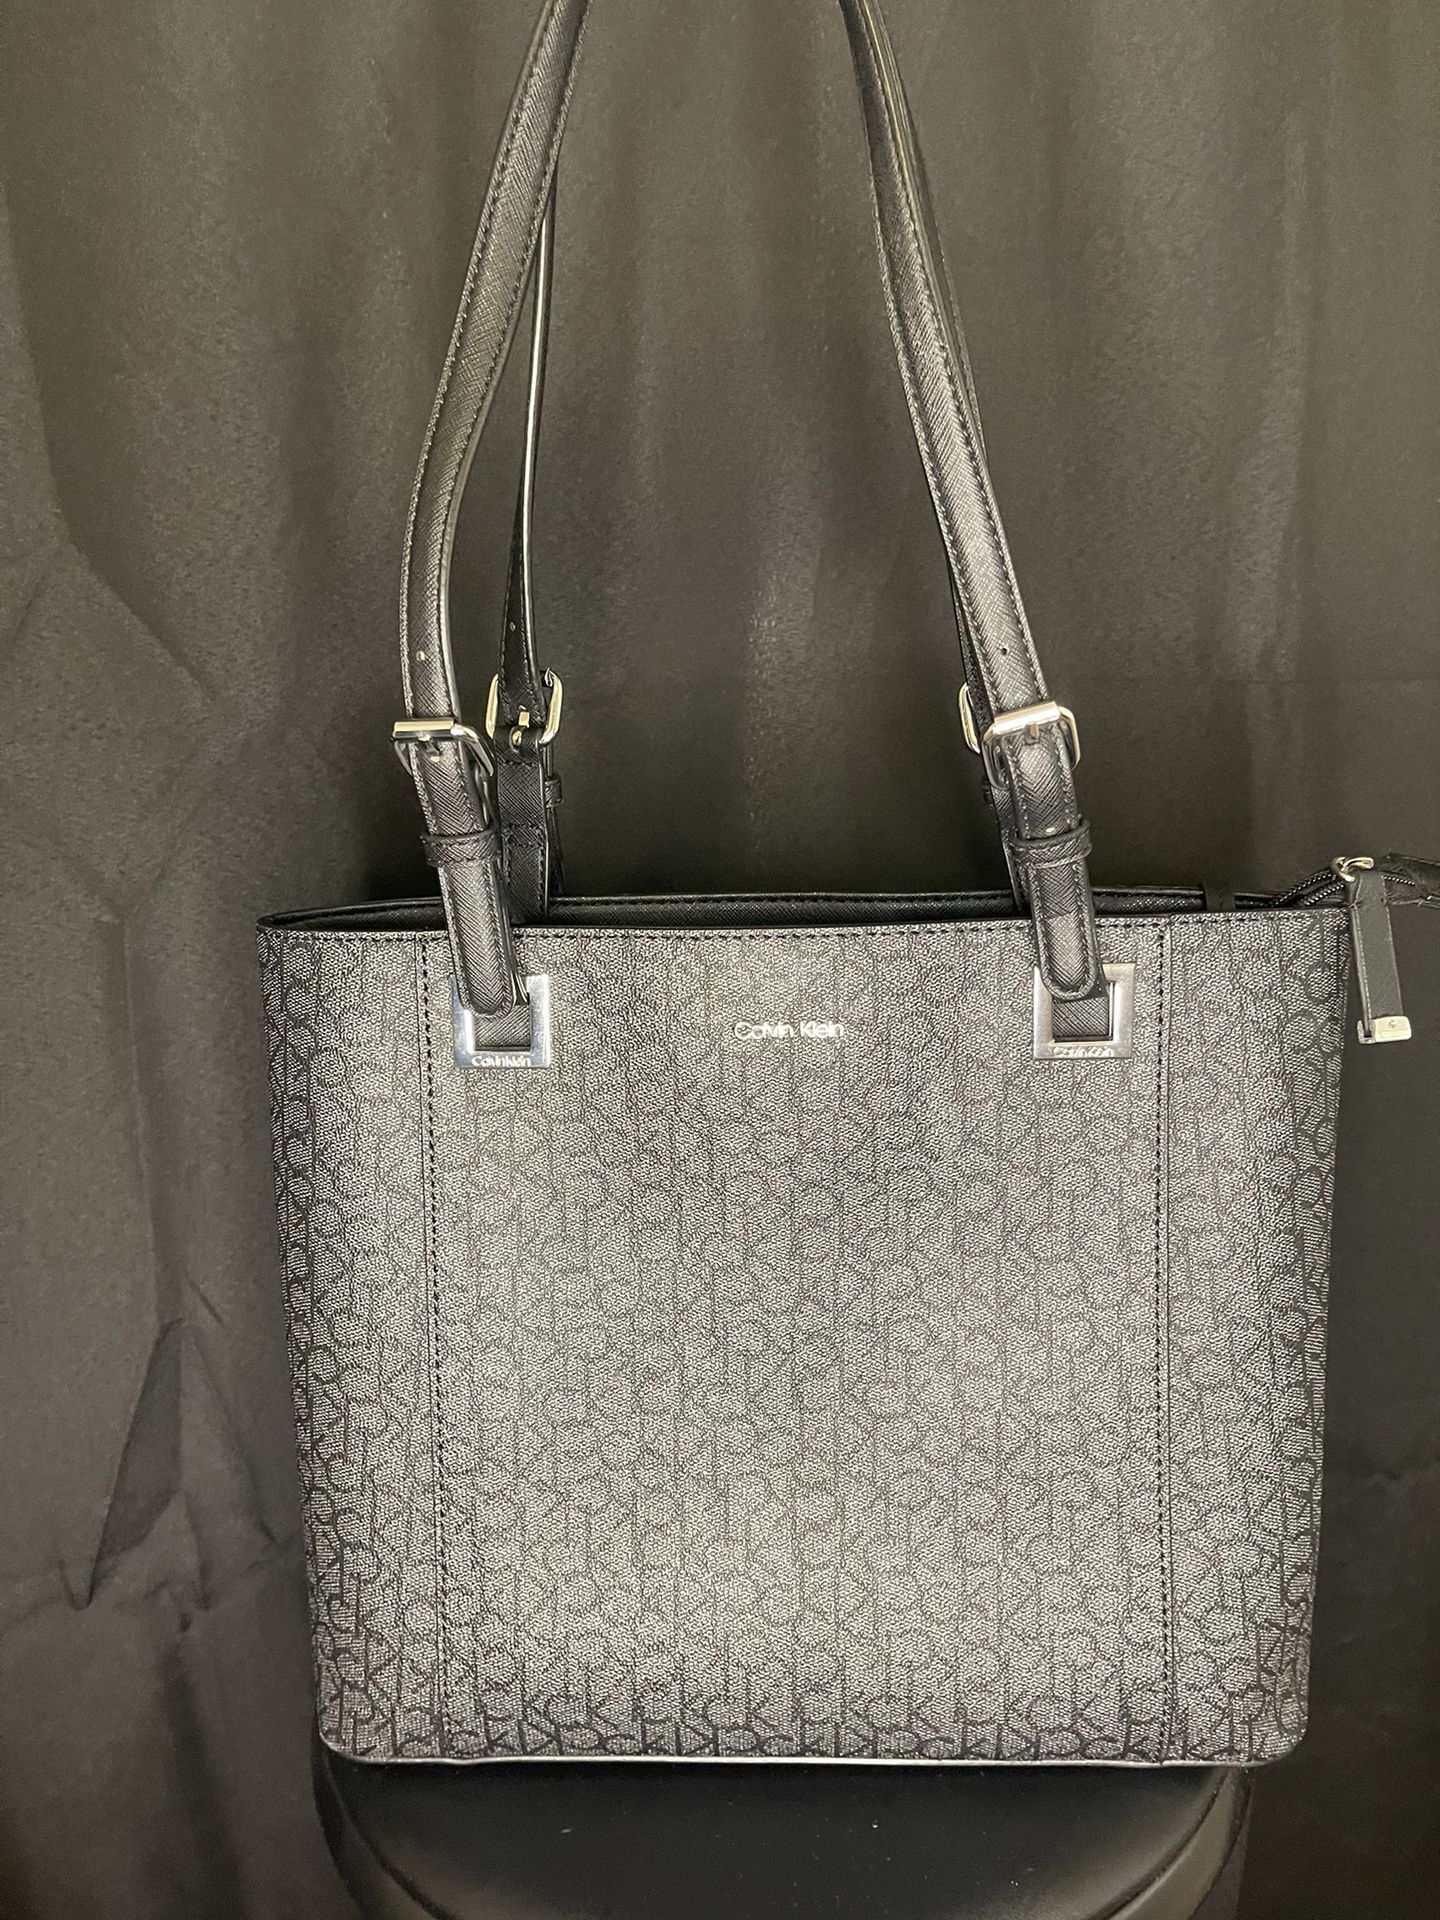 Calvin Klein Women's Black Tote bag for Sale in Charlotte, NC - OfferUp